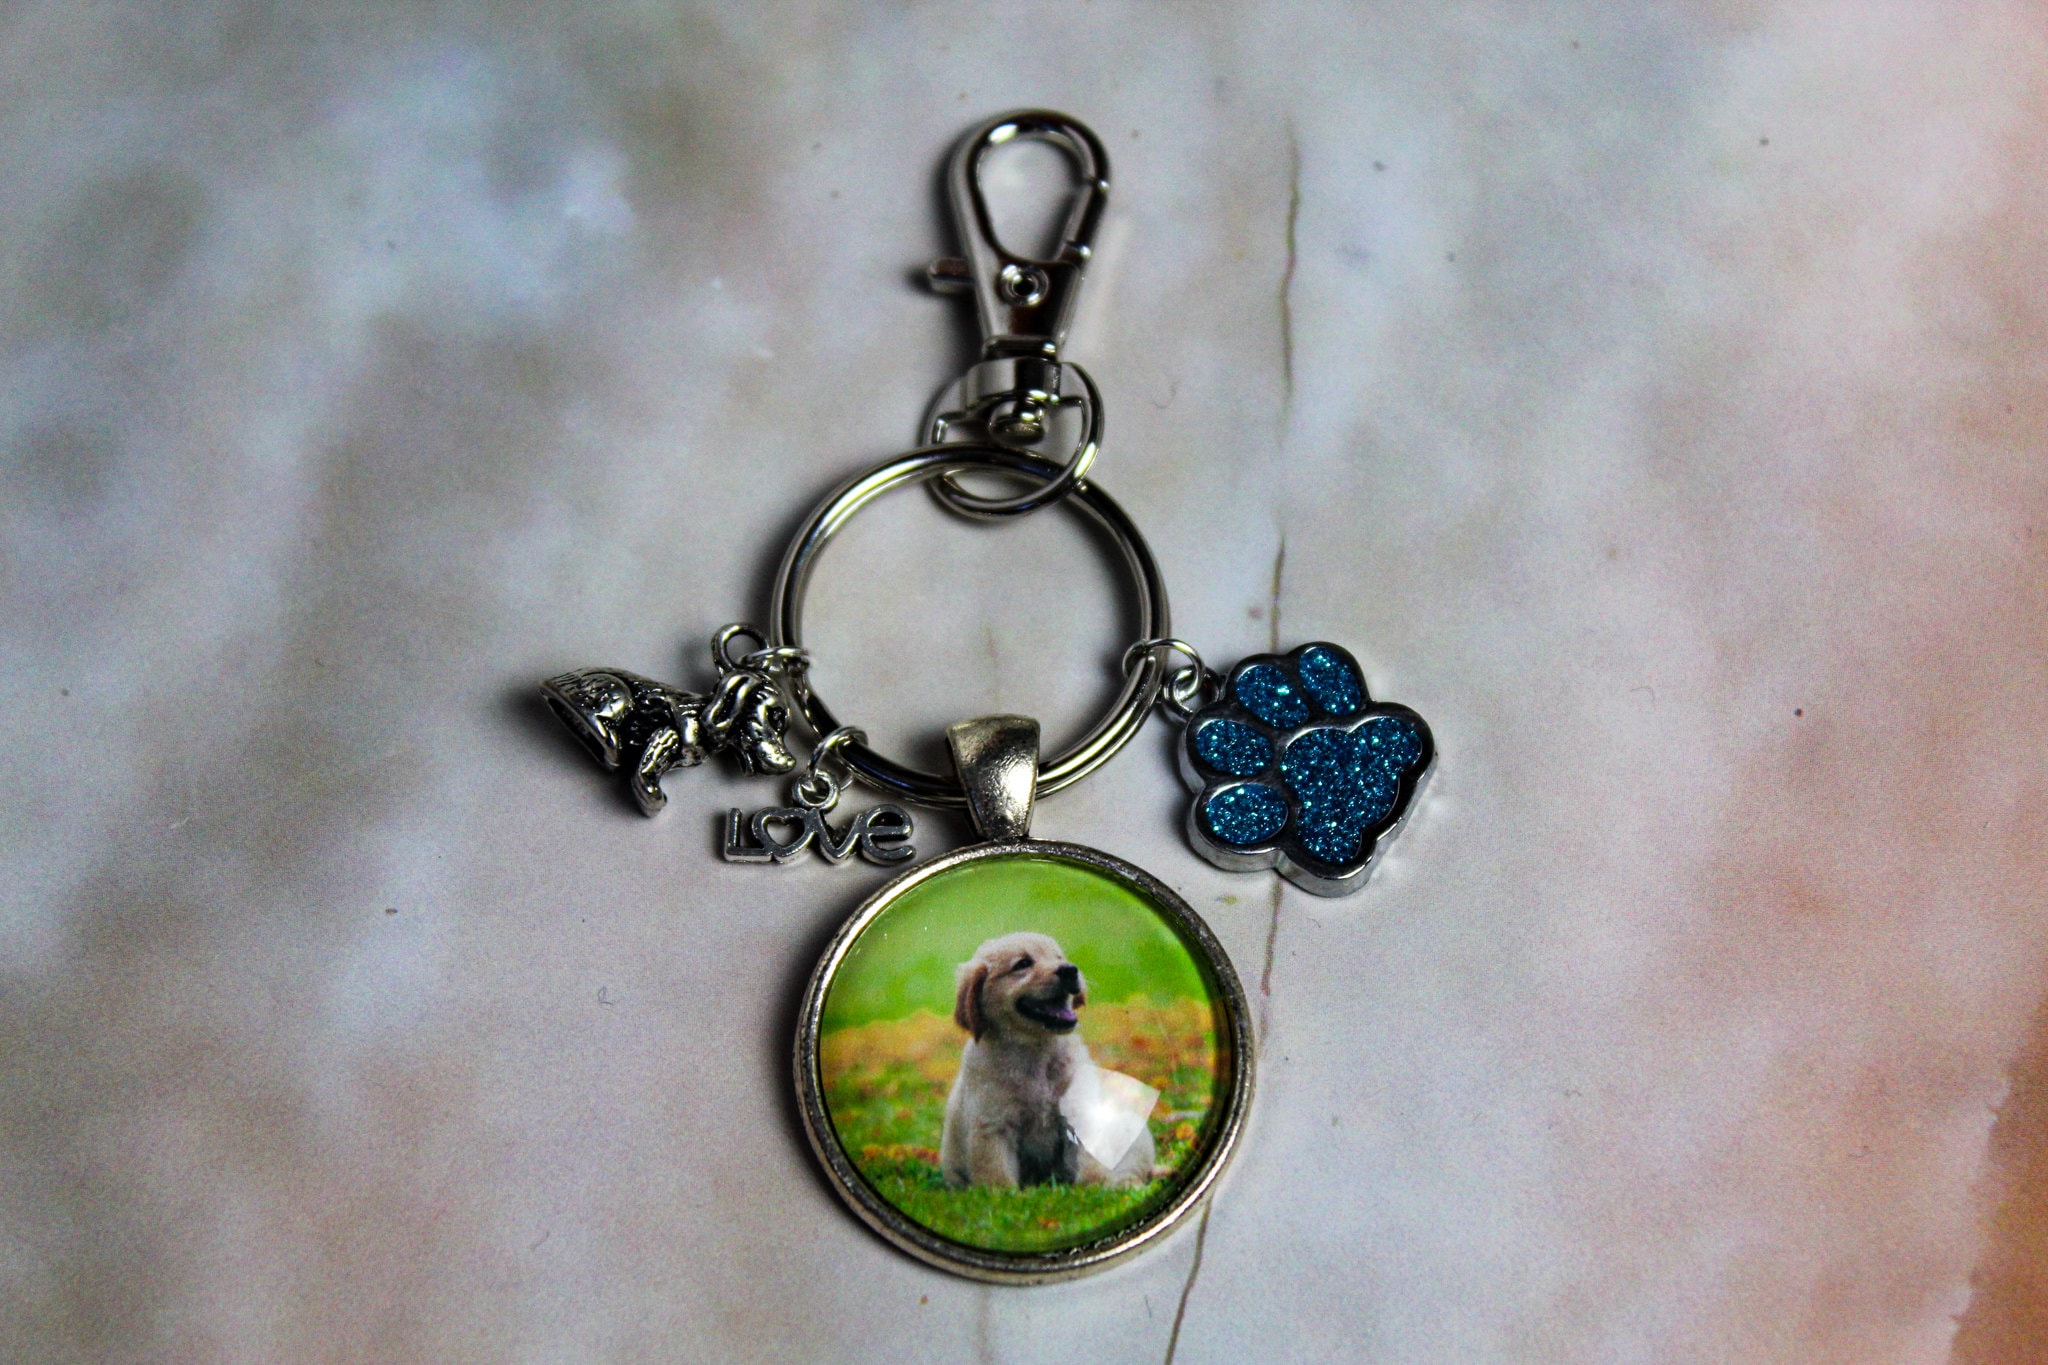 Buy Dog Bag Charm Online In India -  India